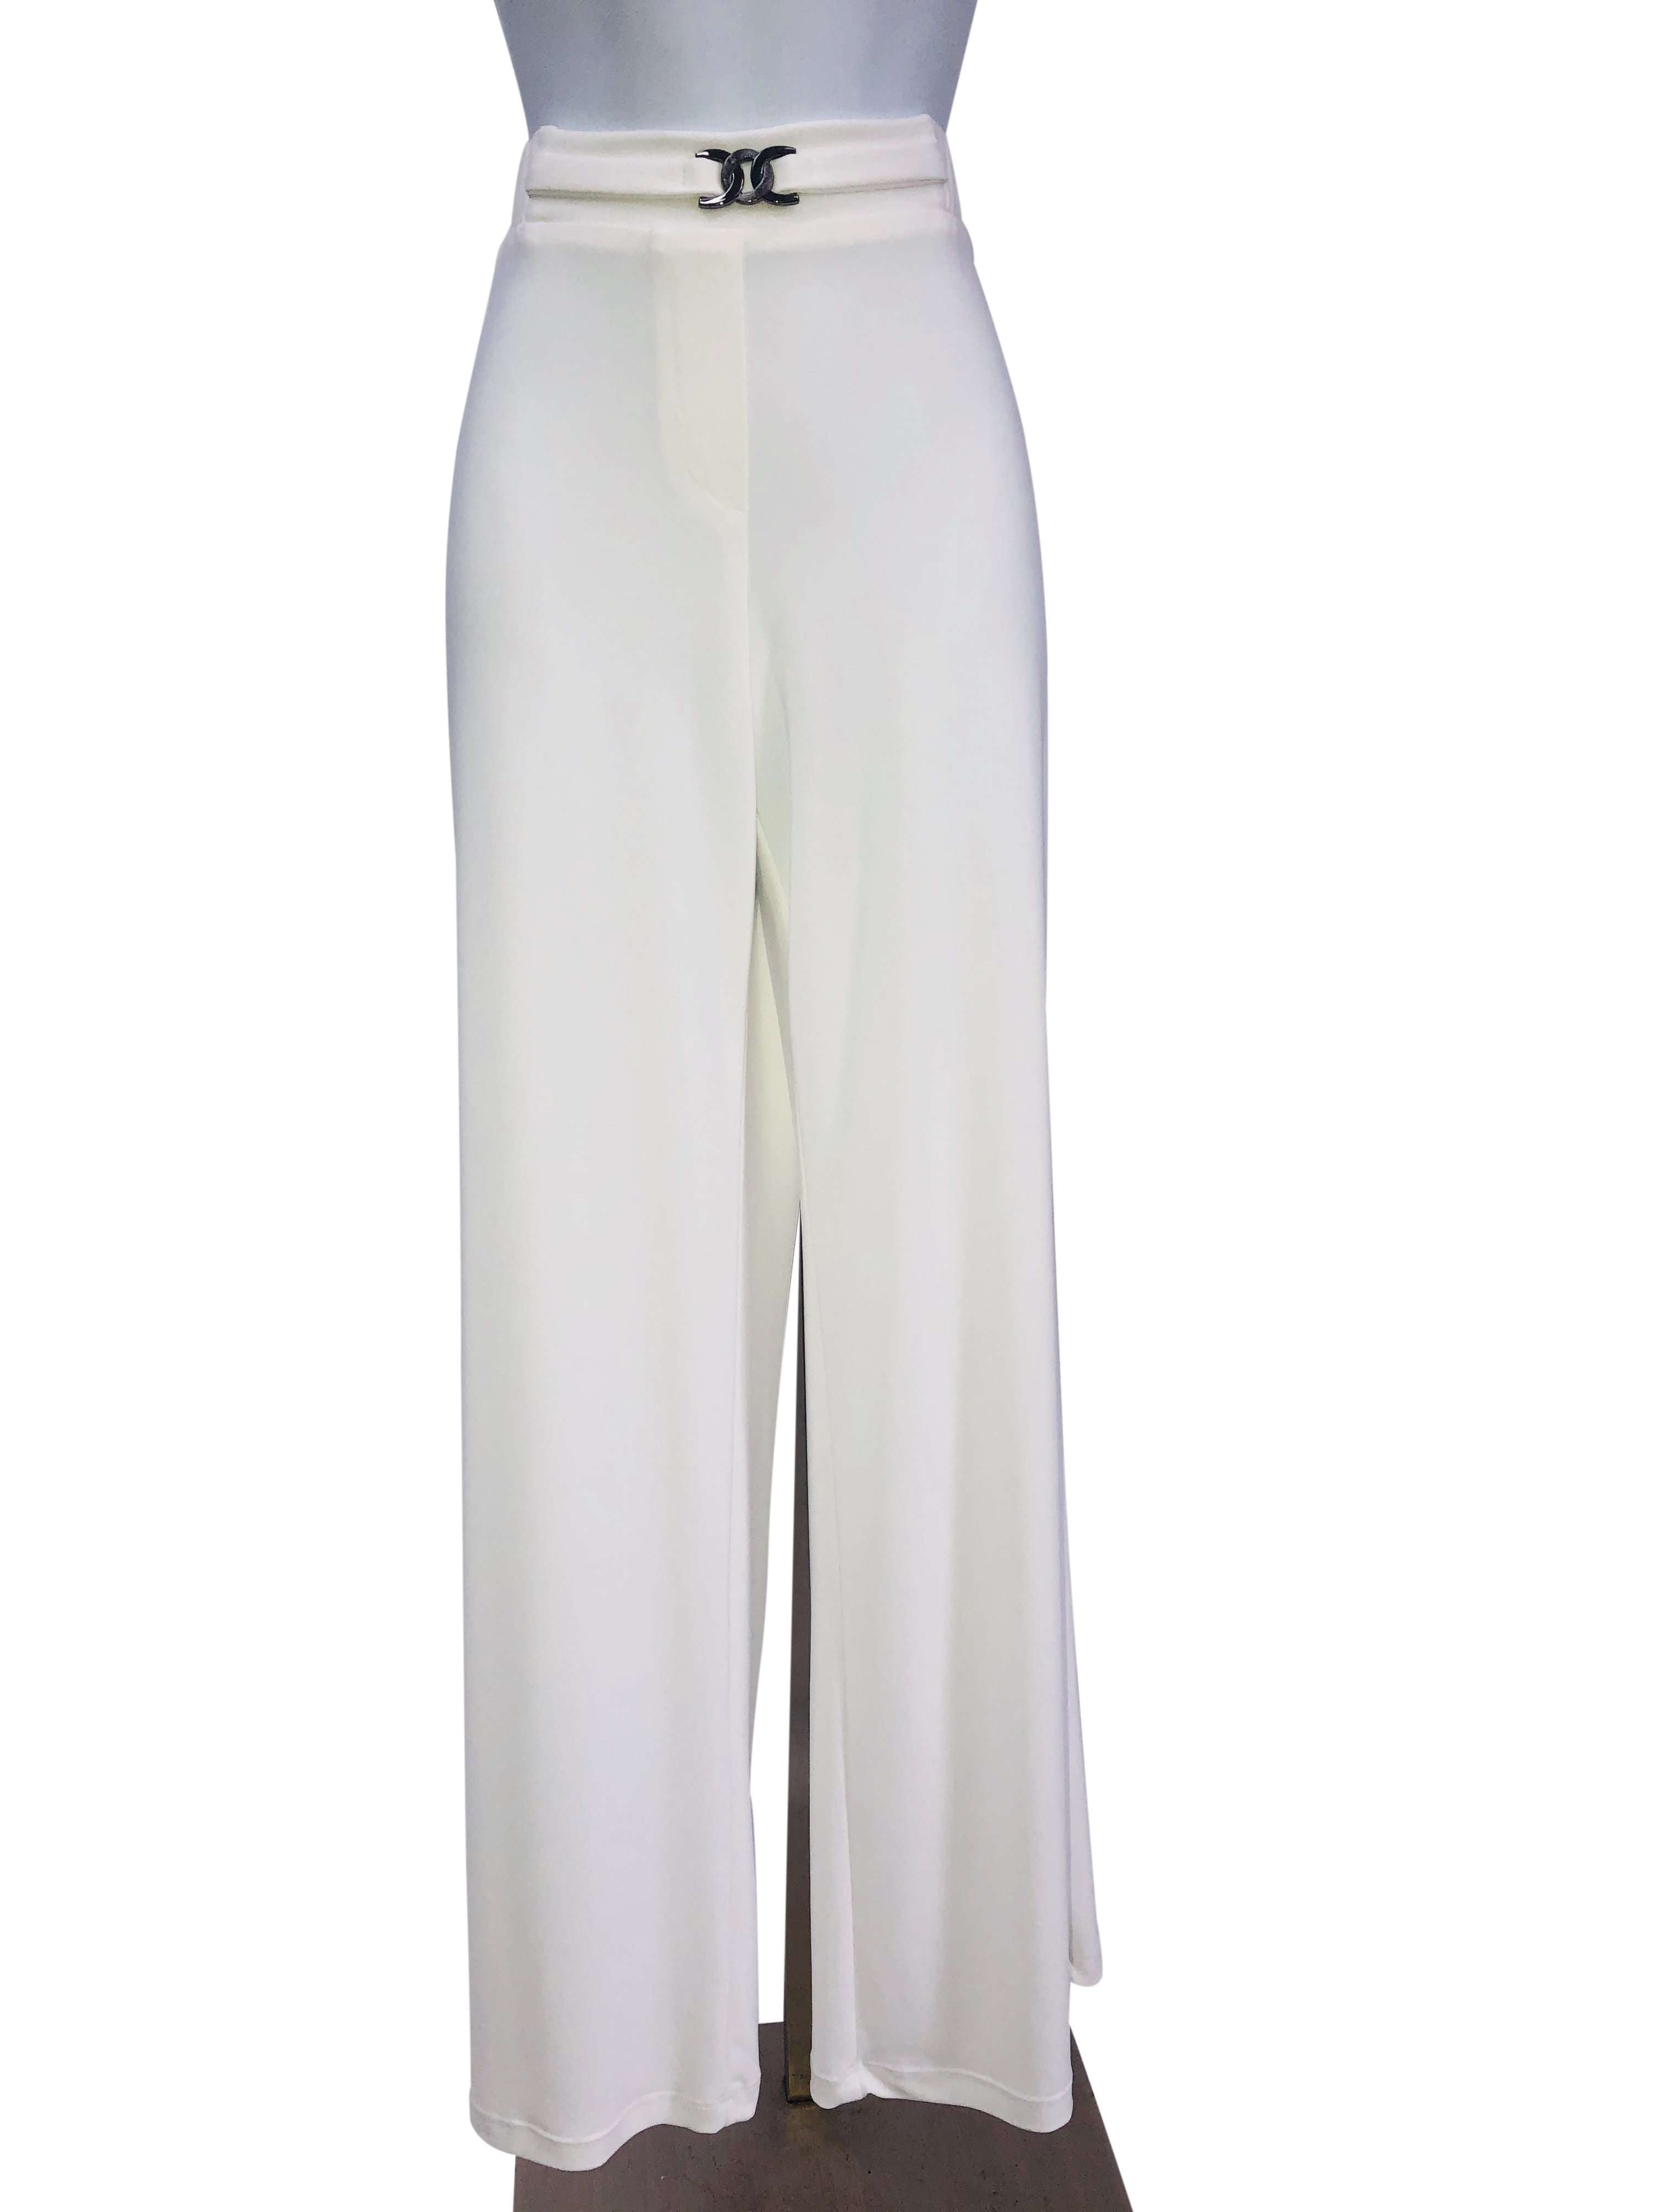 Women's Pants Ivory Off White Flowing Comfort Fit &quot;Magic Pant &quot;Our Best Seller for over 5 Years Quality Made in Canada - Yvonne Marie - Yvonne Marie